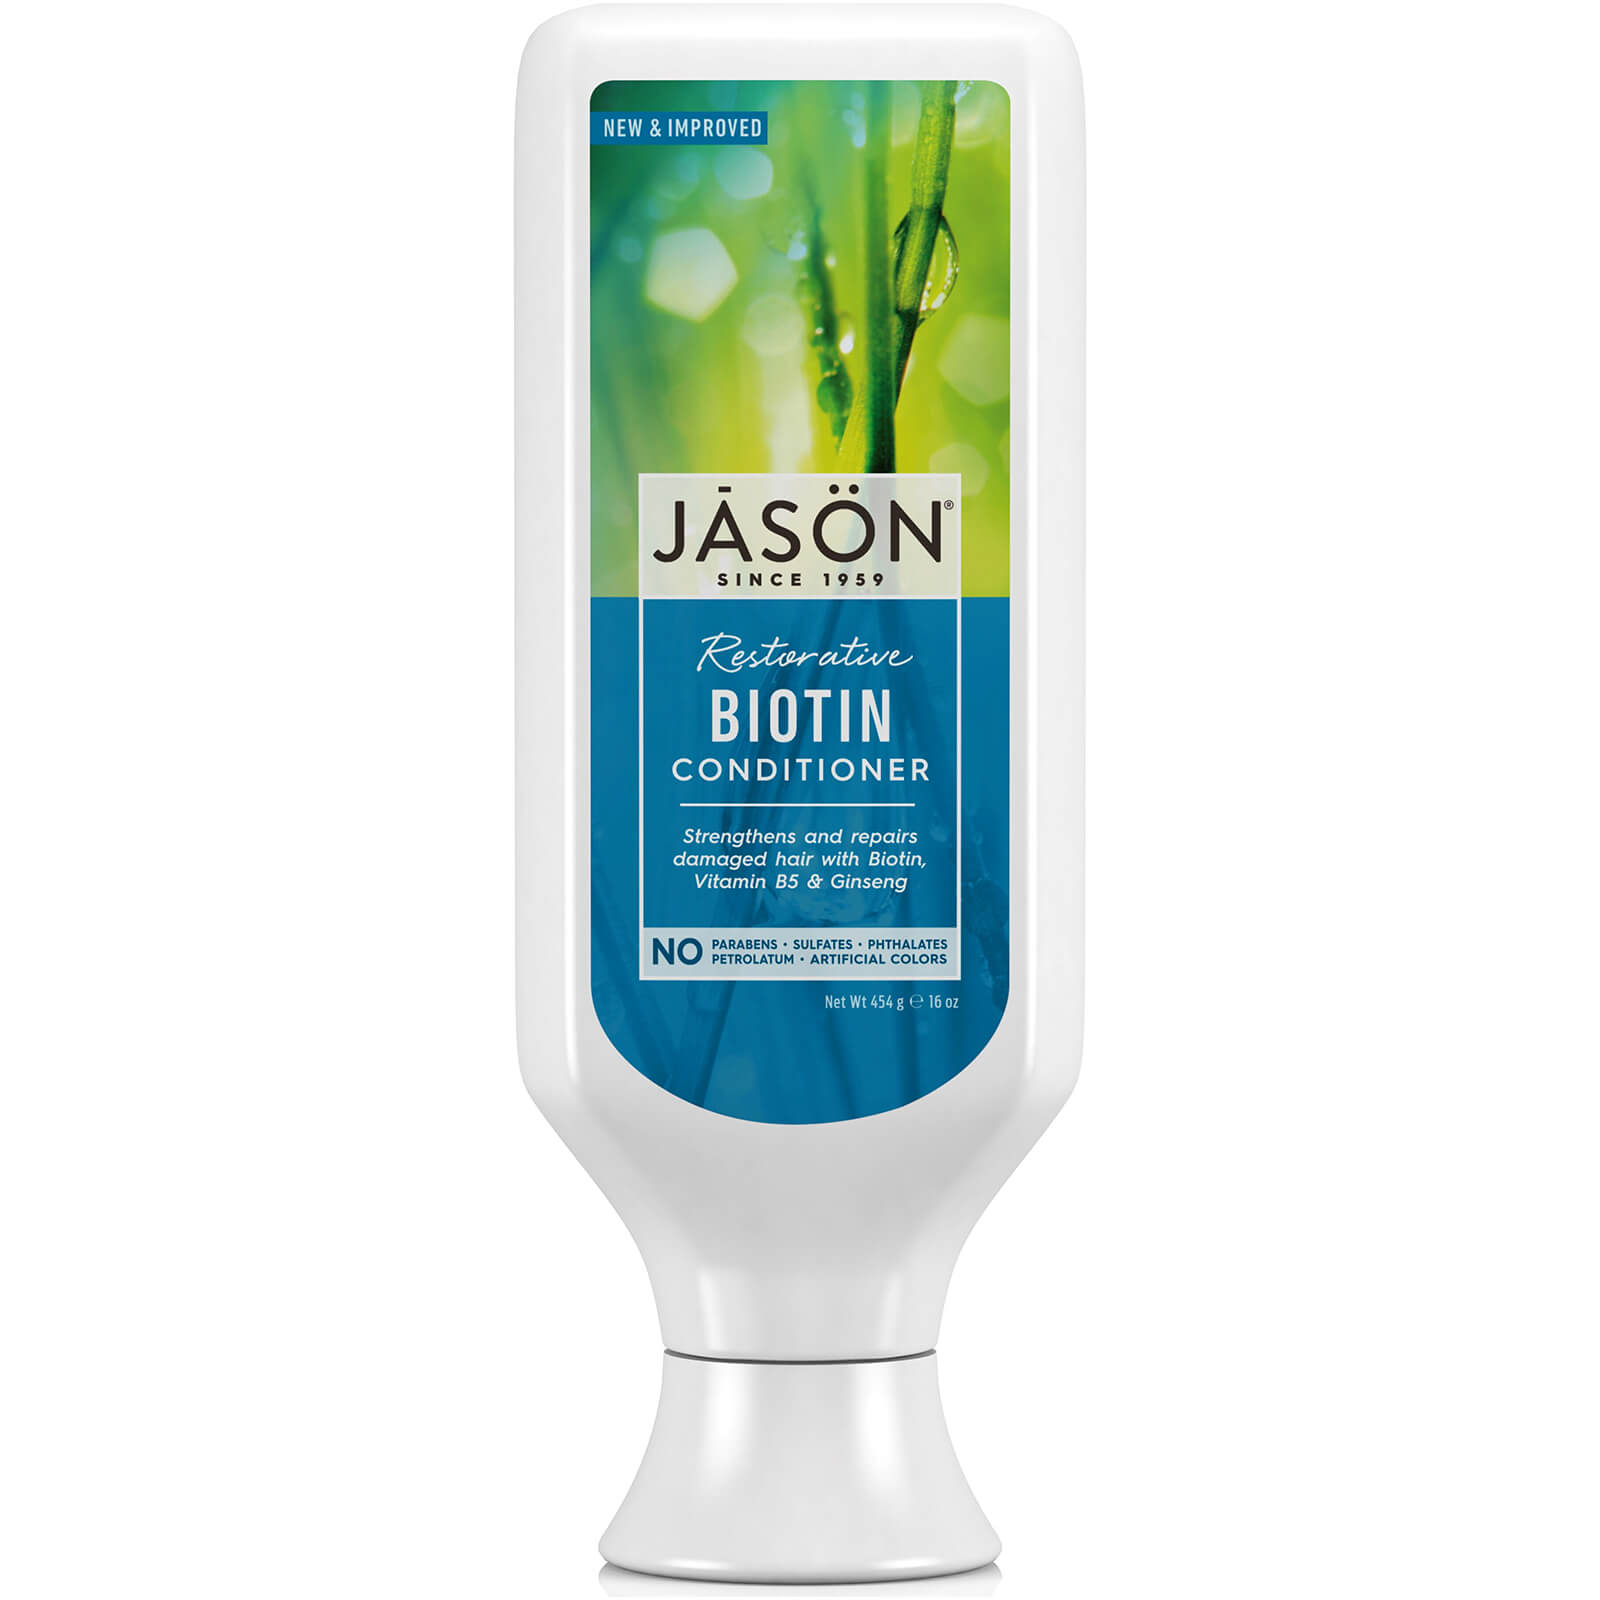 JASON Hair Care Biotin and Hyaluronic Acid Conditioner 454g